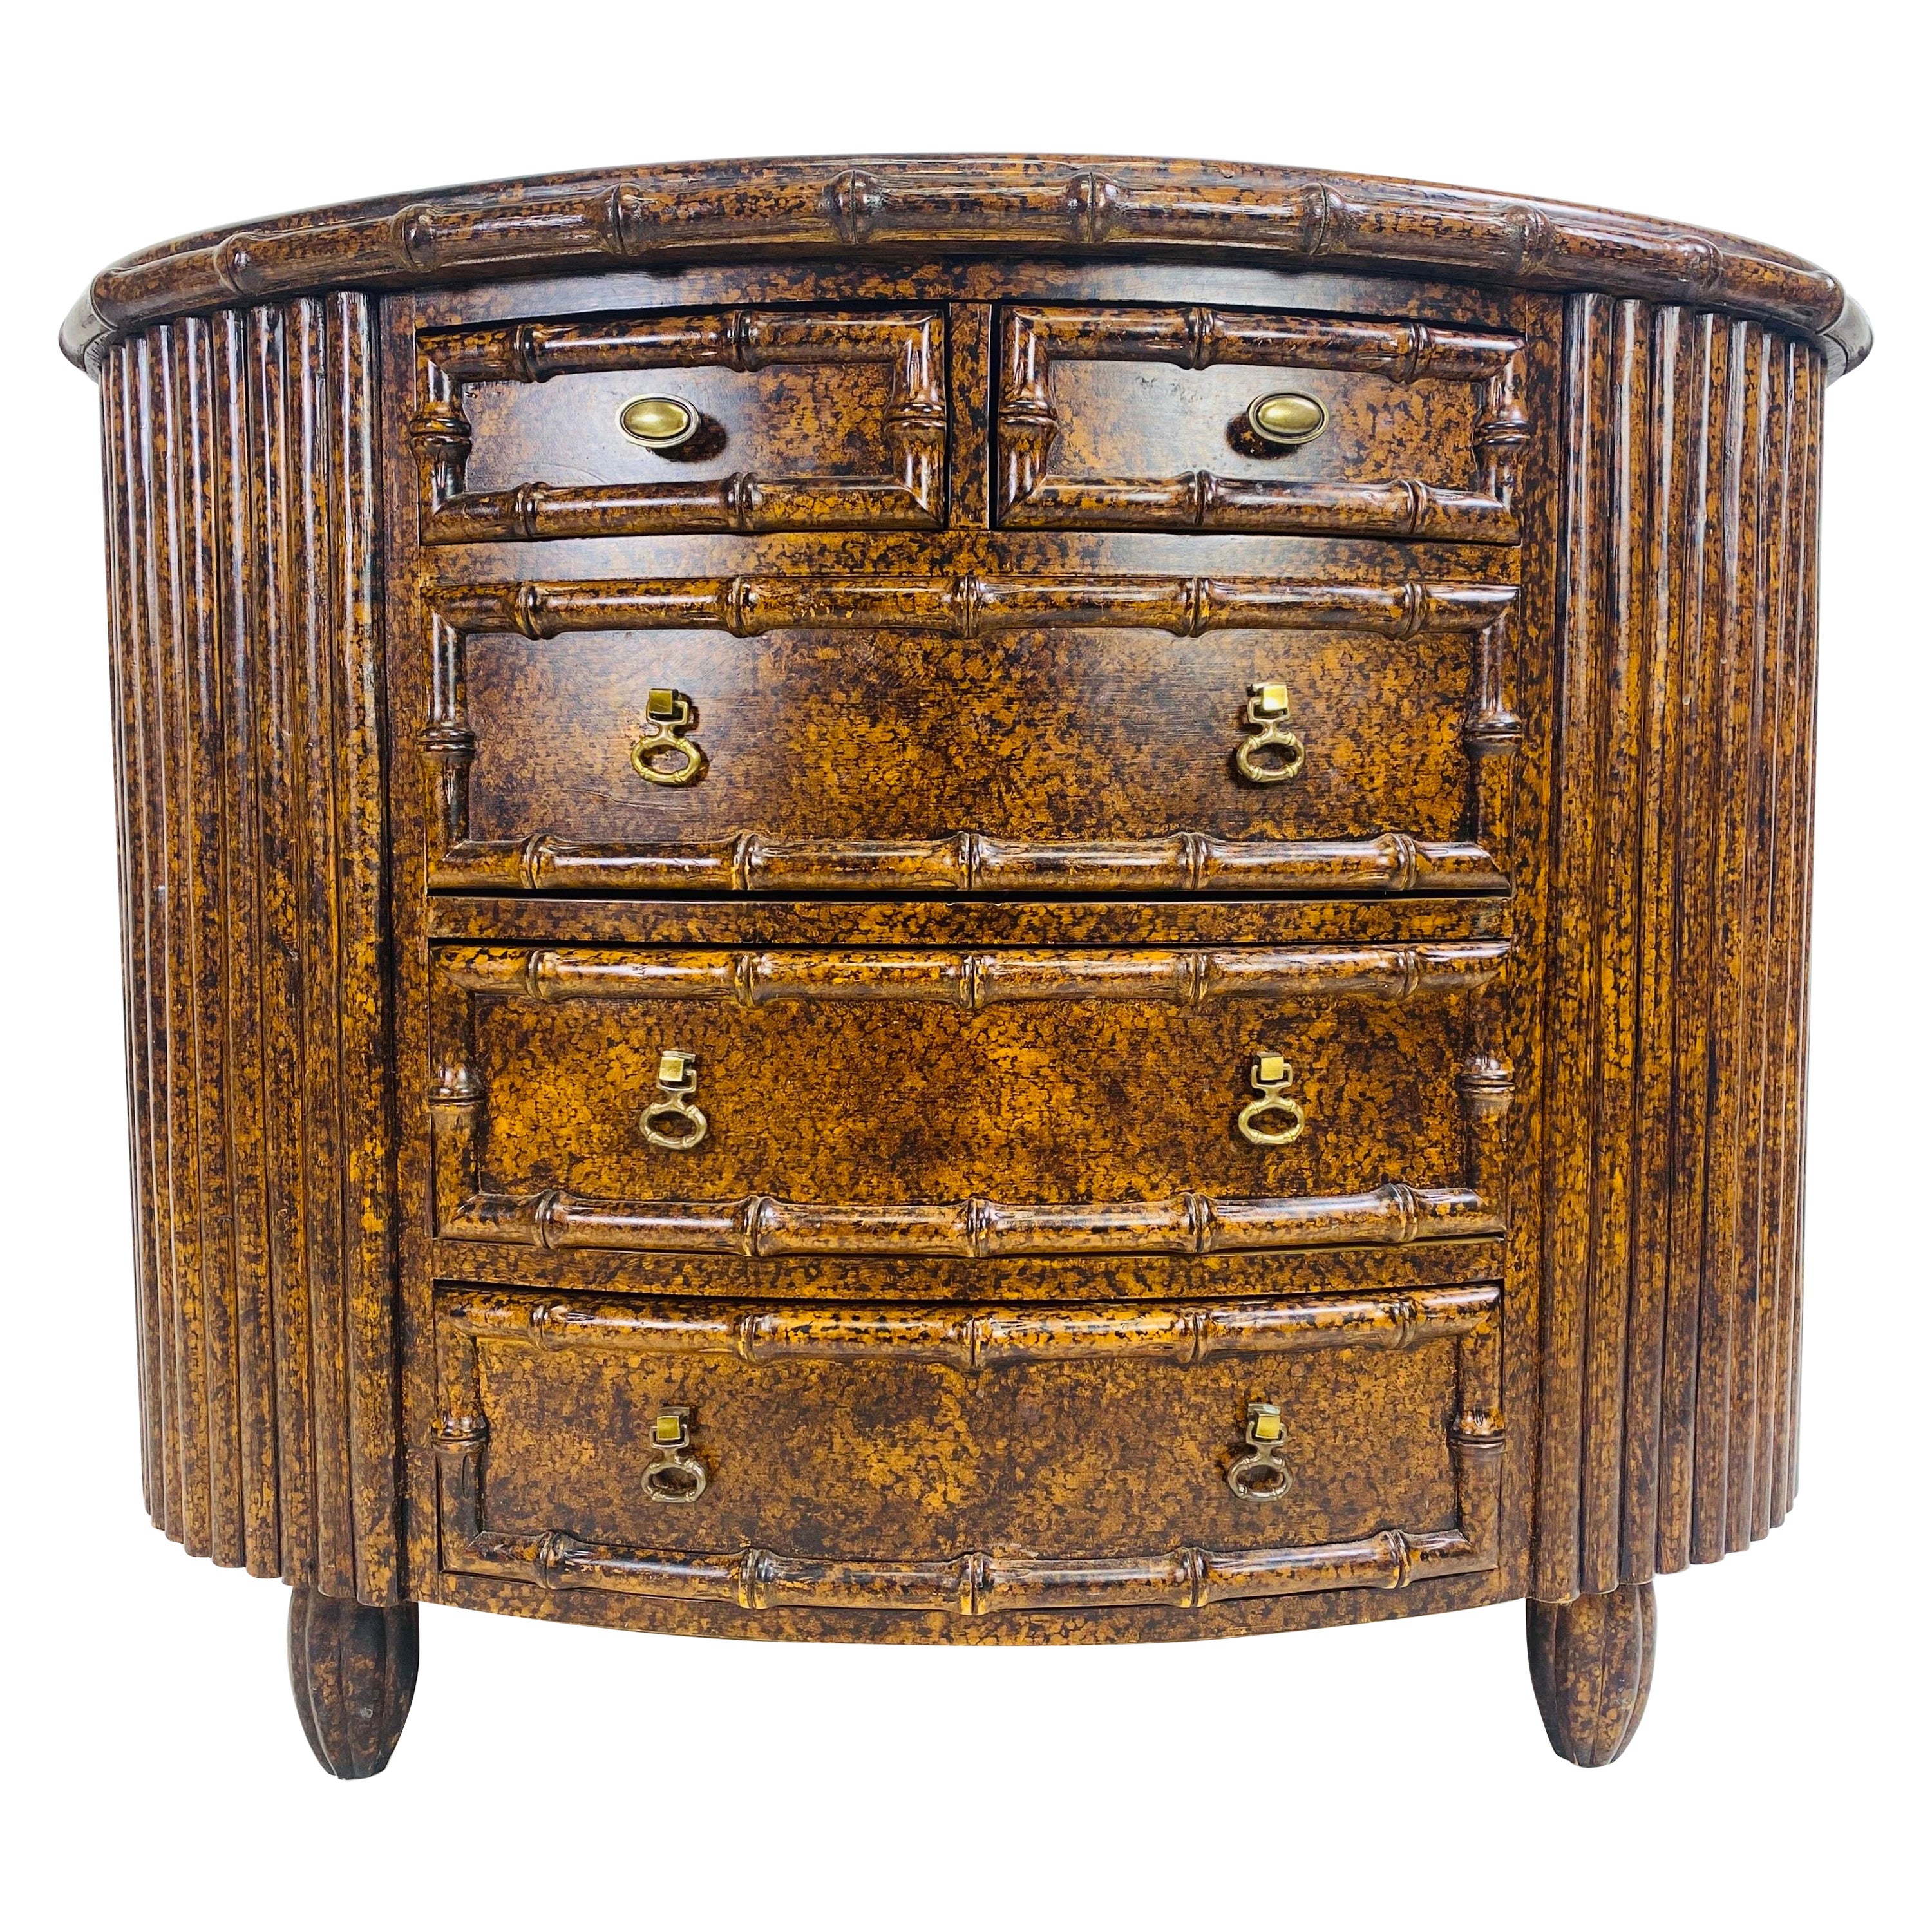 Regency style faux tortoiseshell chest of drawers after Maitland Smith